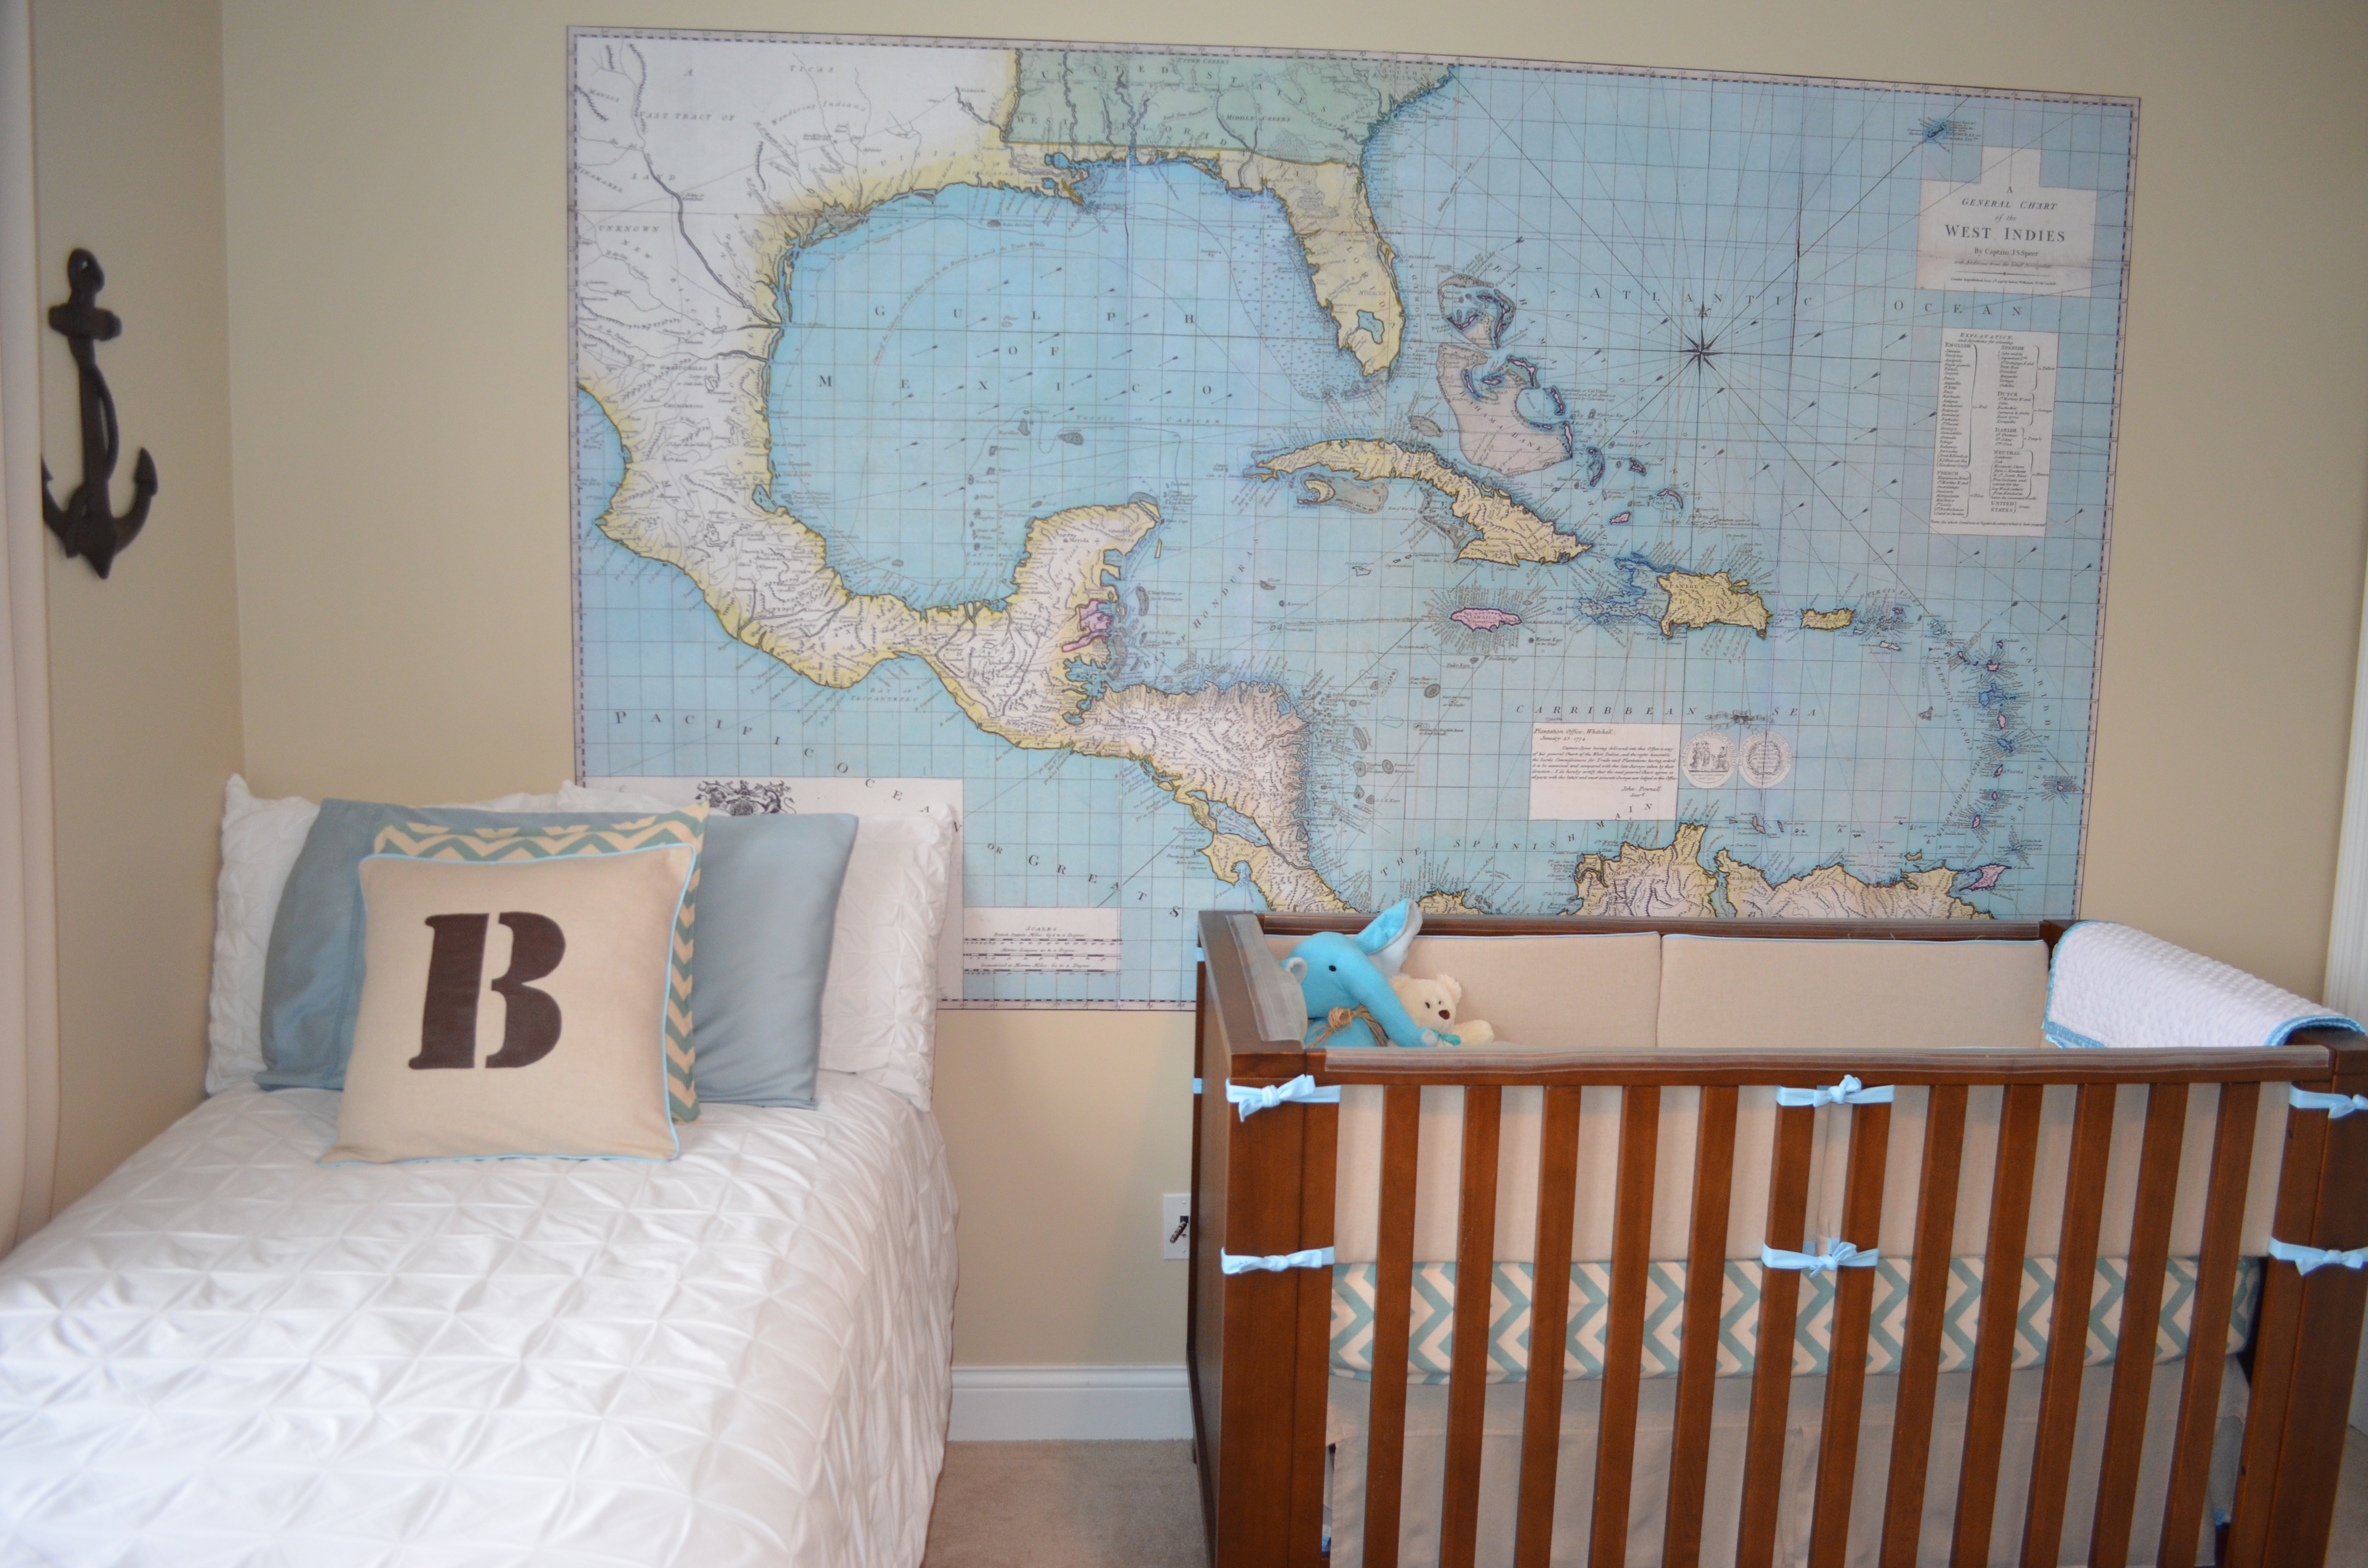 Map Wall Decal